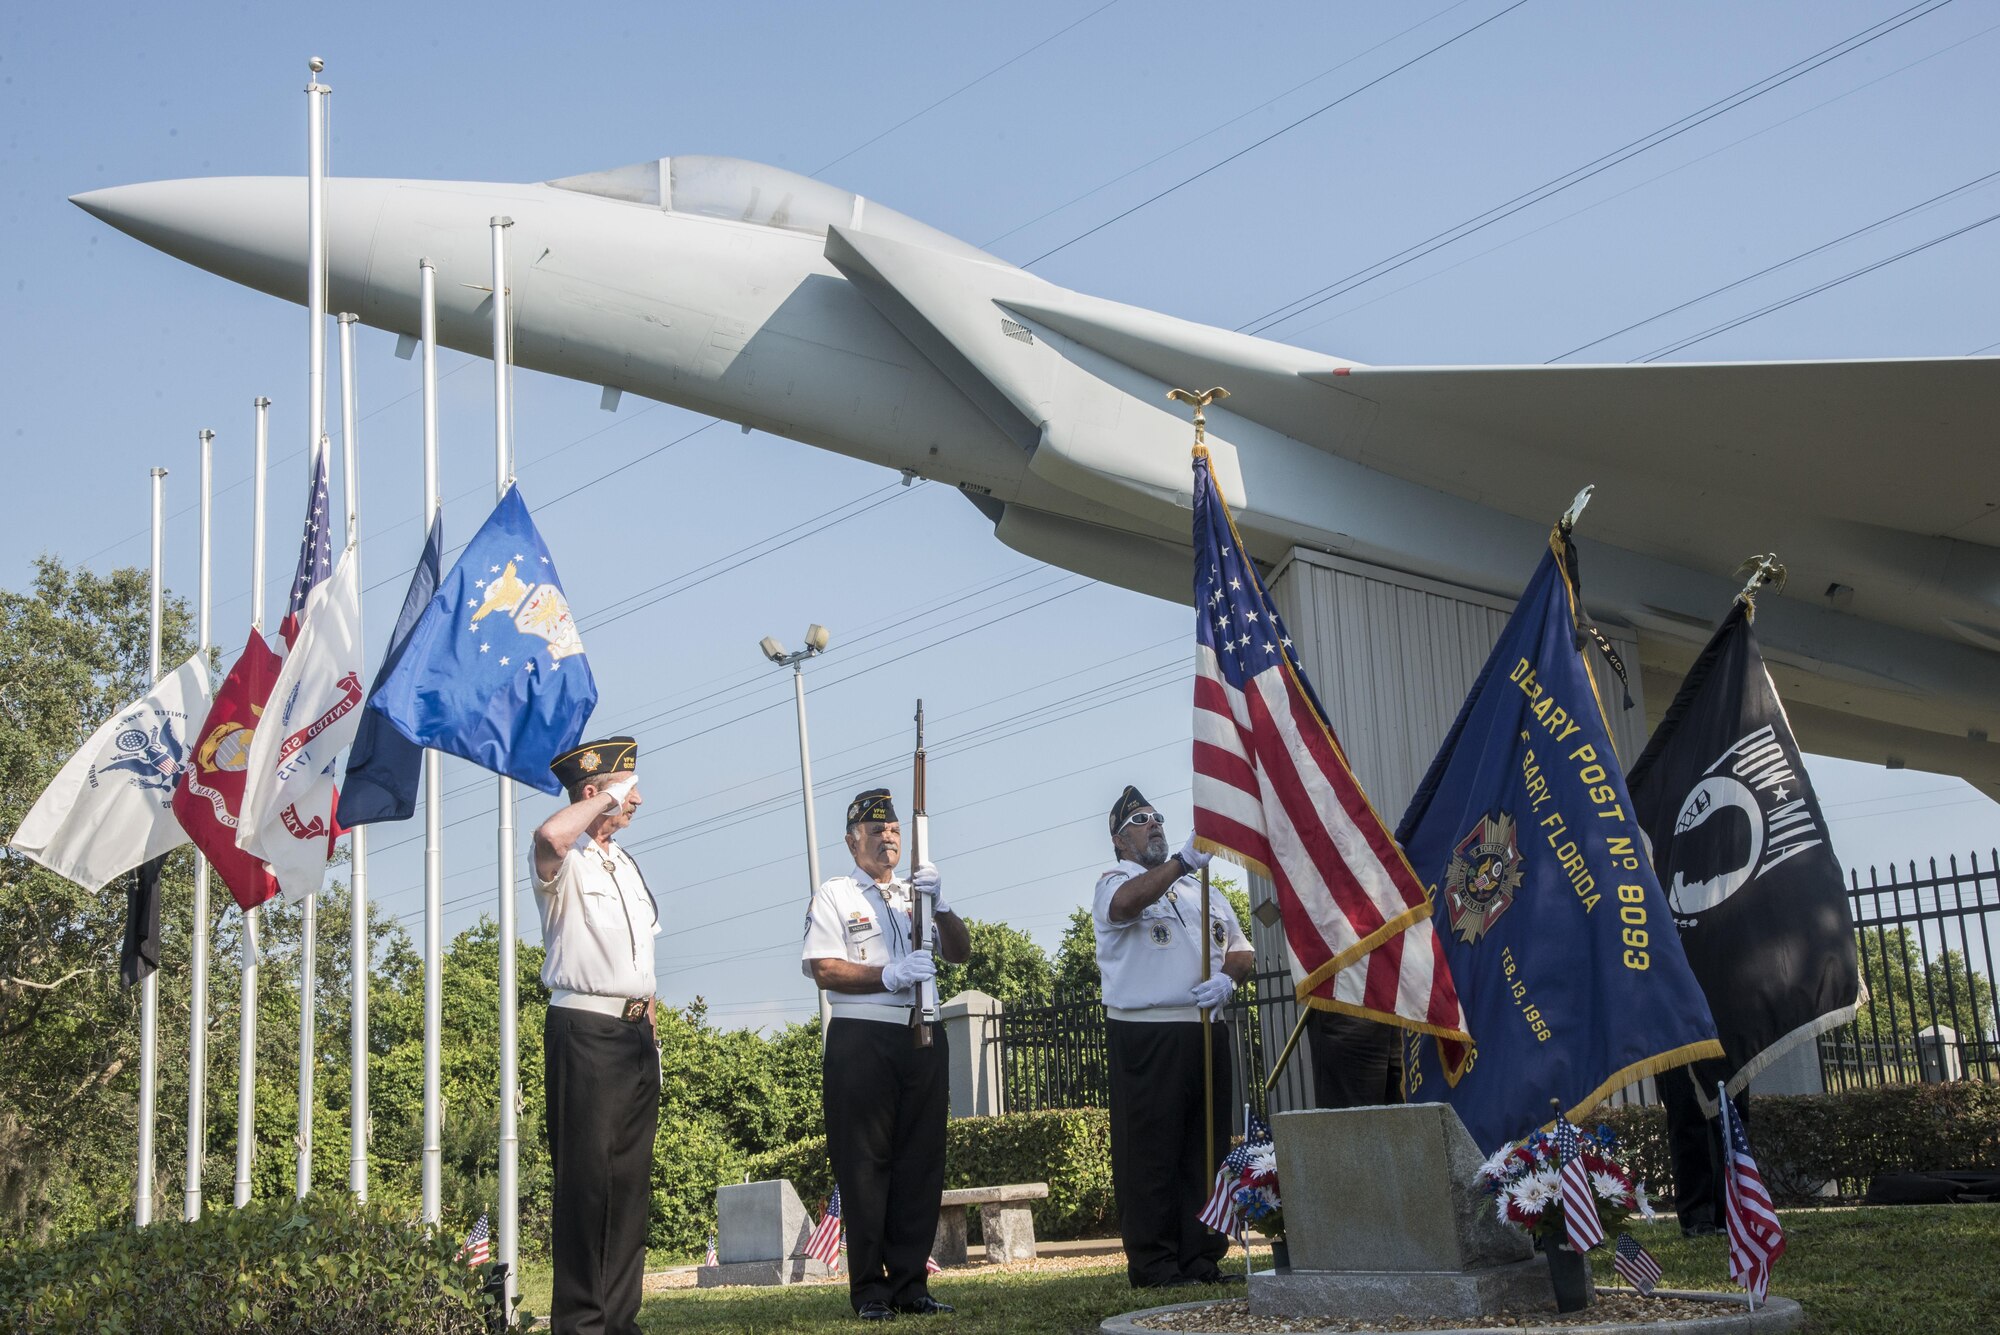 The honor guard from Veterans of Foreign Wars post 8093 presents the colors during an aircraft rededication ceremony June 14, 2016, at Memorial Park in DeBary Fla. The aircraft was rededicated in memory of Airman 1st Class Brian McVeigh, a member of the 33rd Fighter Wing, who was killed in the Khobar Towers terrorist attack in 1996. (U.S. Air Force photo by Senior Airman Stormy Archer/Released)